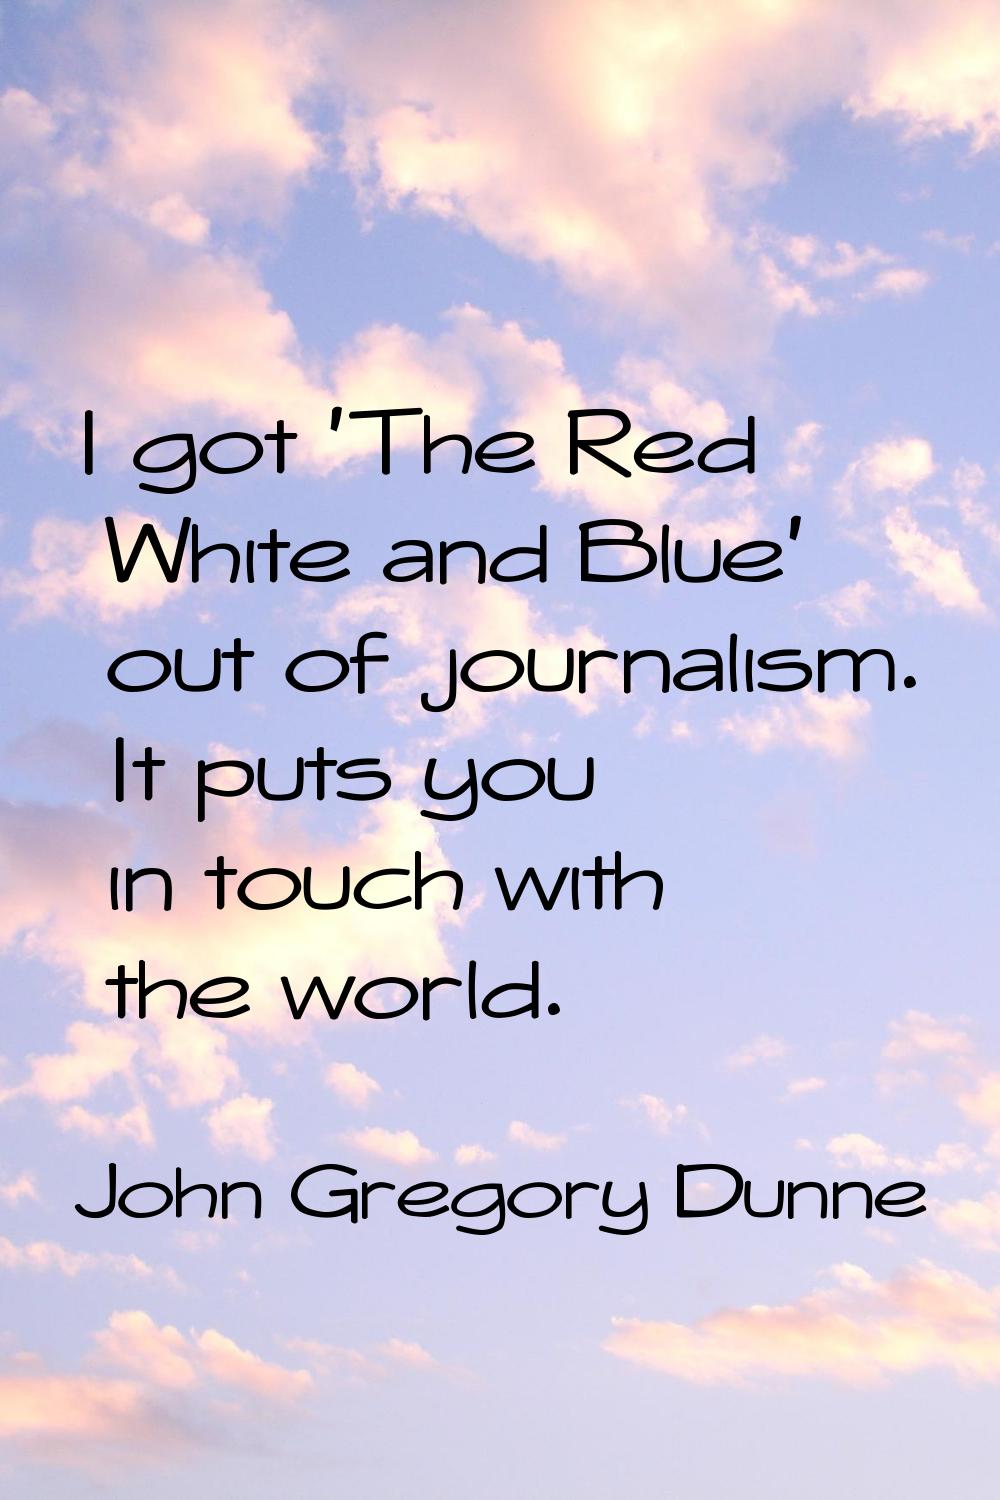 I got 'The Red White and Blue' out of journalism. It puts you in touch with the world.